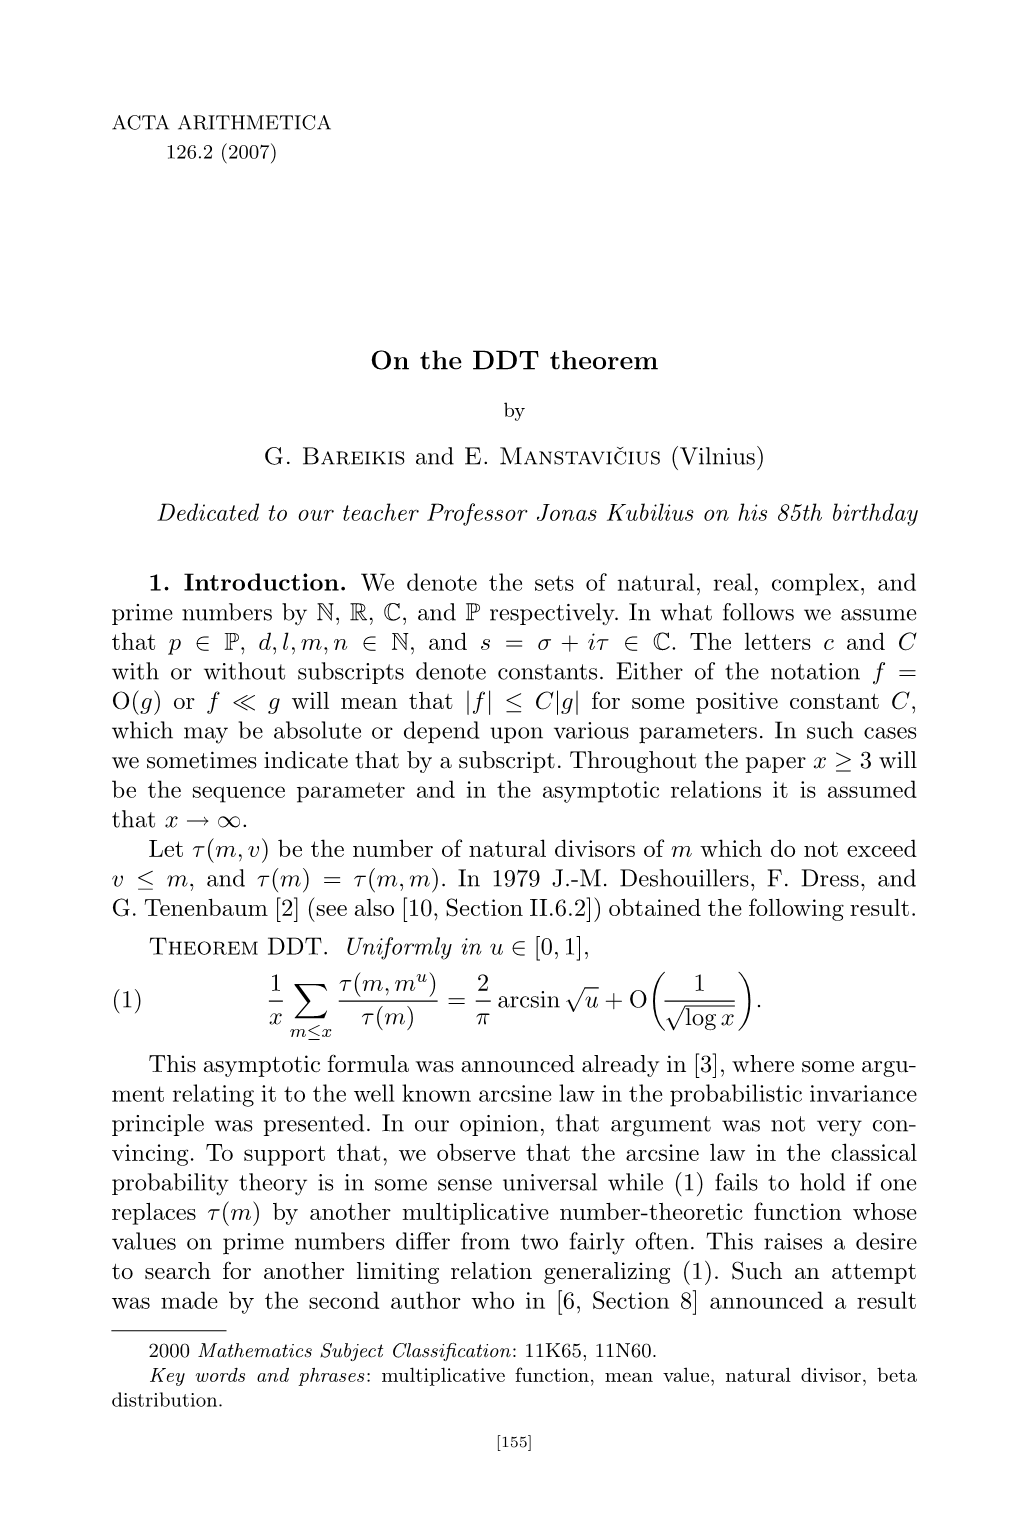 On the DDT Theorem